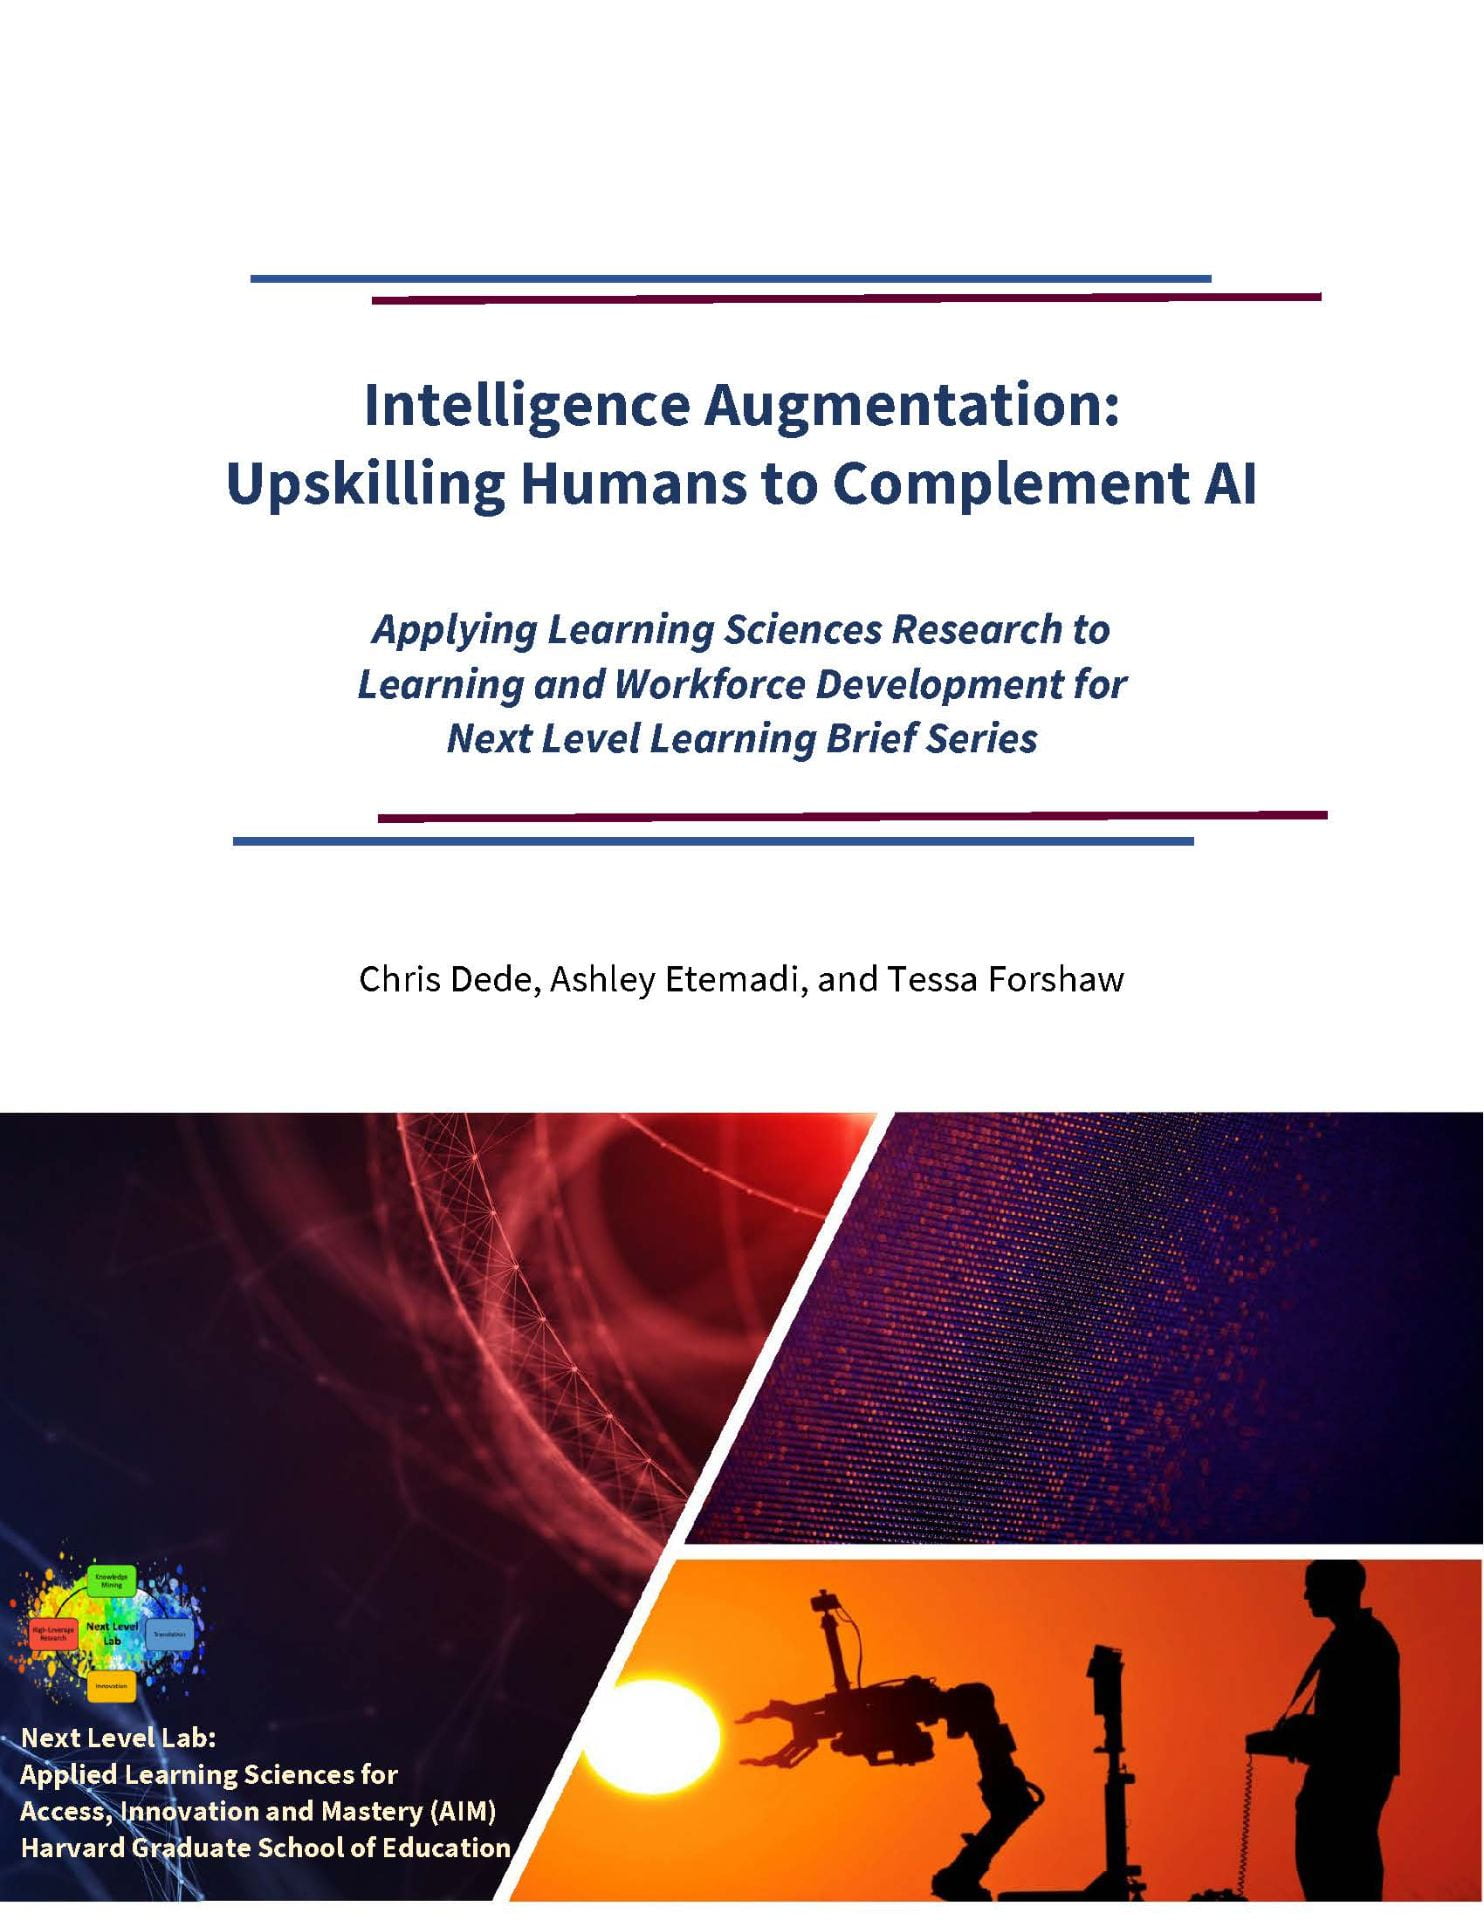 Intelligence Augmentation: Upskilling Humans to Complement AI